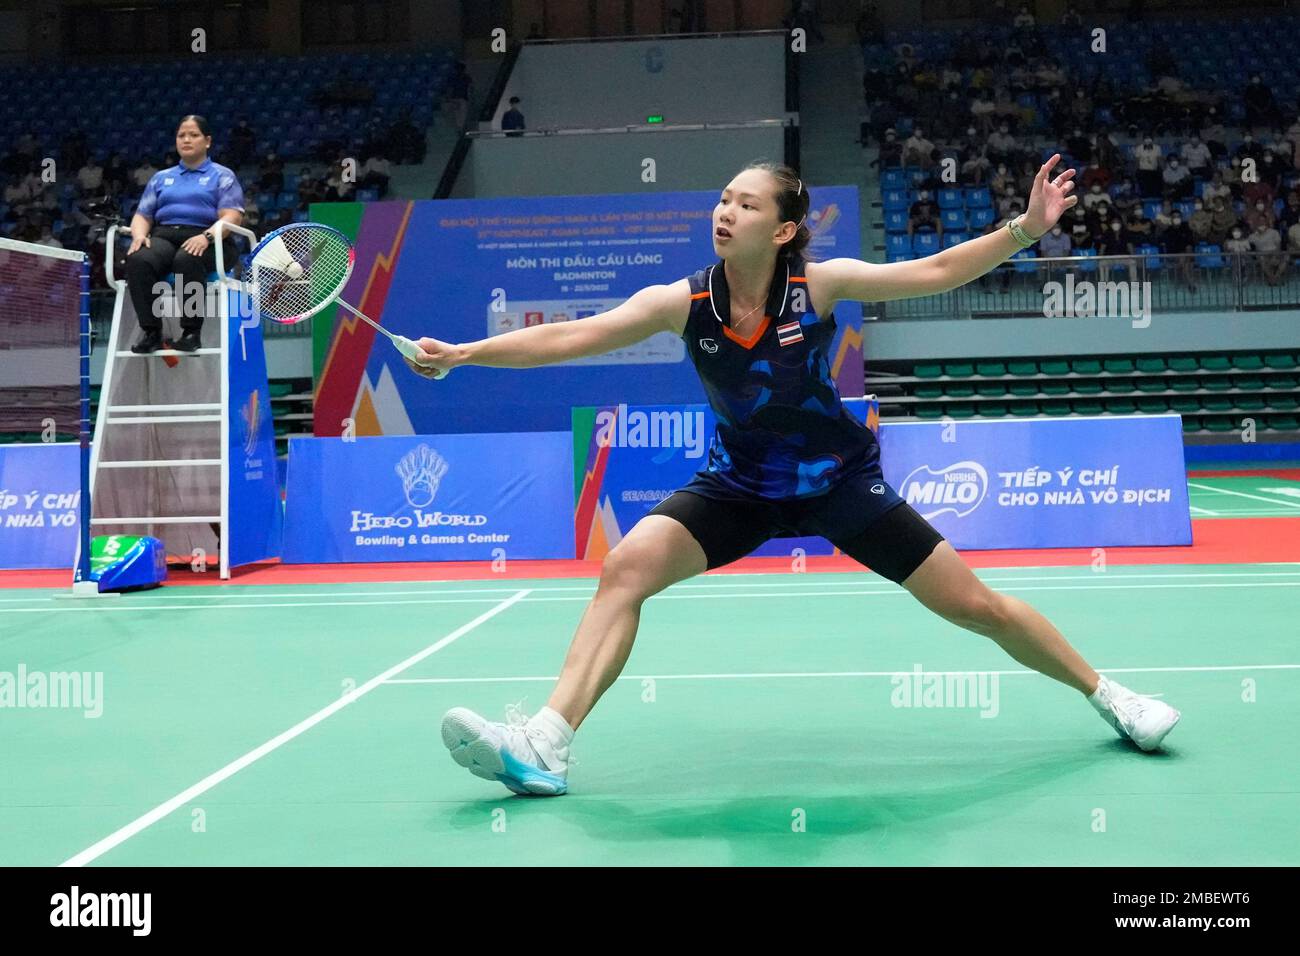 Pornpawe Chochuwong of Thailand returns a shot to Putri Kusuma Wardani of Indonesia during their womens singles team final badminton match at the 31st Southeast Asian Games (SEA Games 31) in Bad